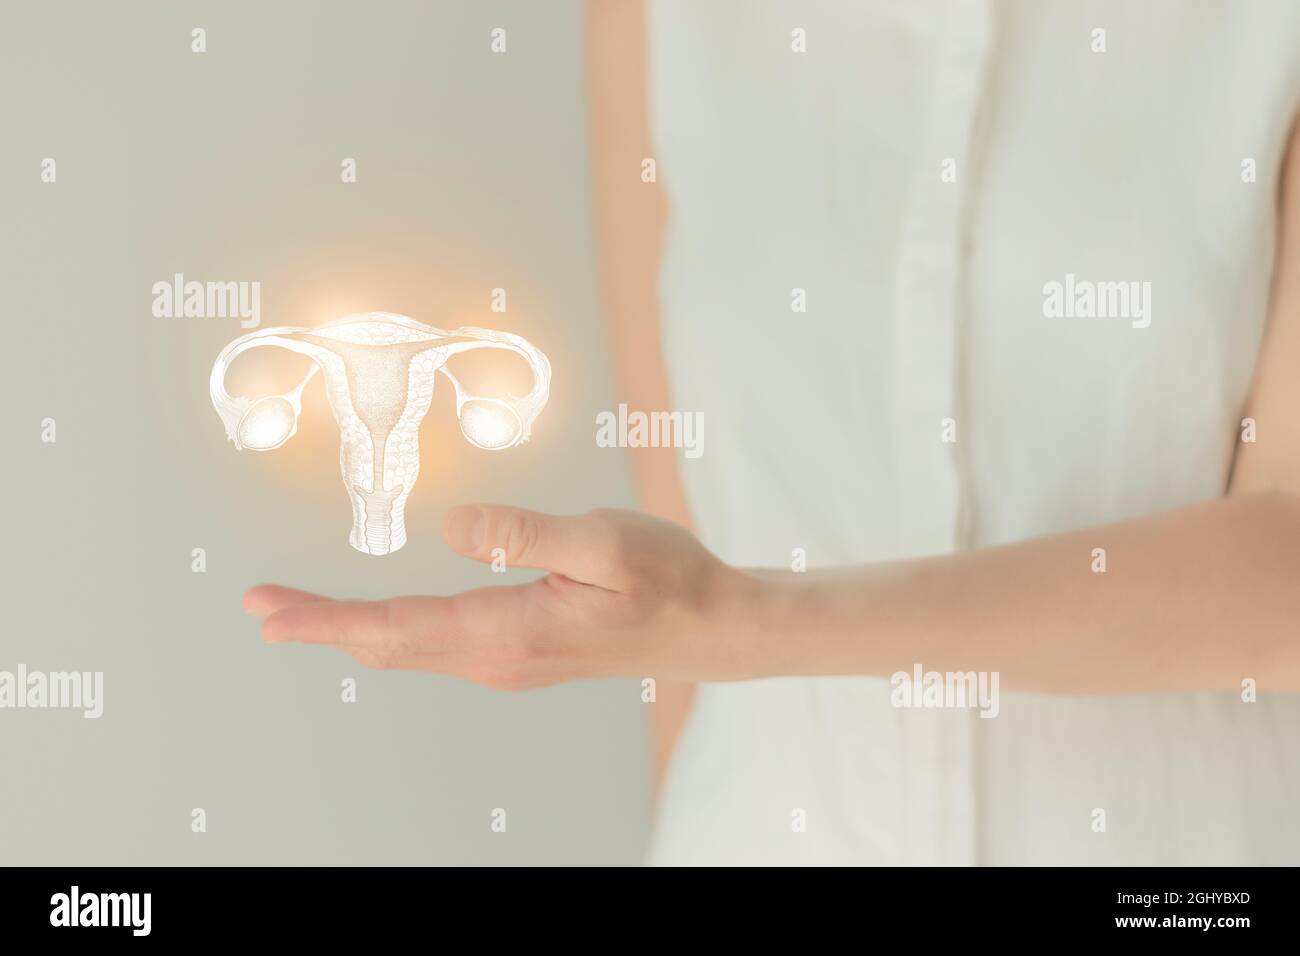 Unrecognizable female patient in white clothes, highlighted handrawn uterus in hands. Human reproductive system issues concept. Stock Photo